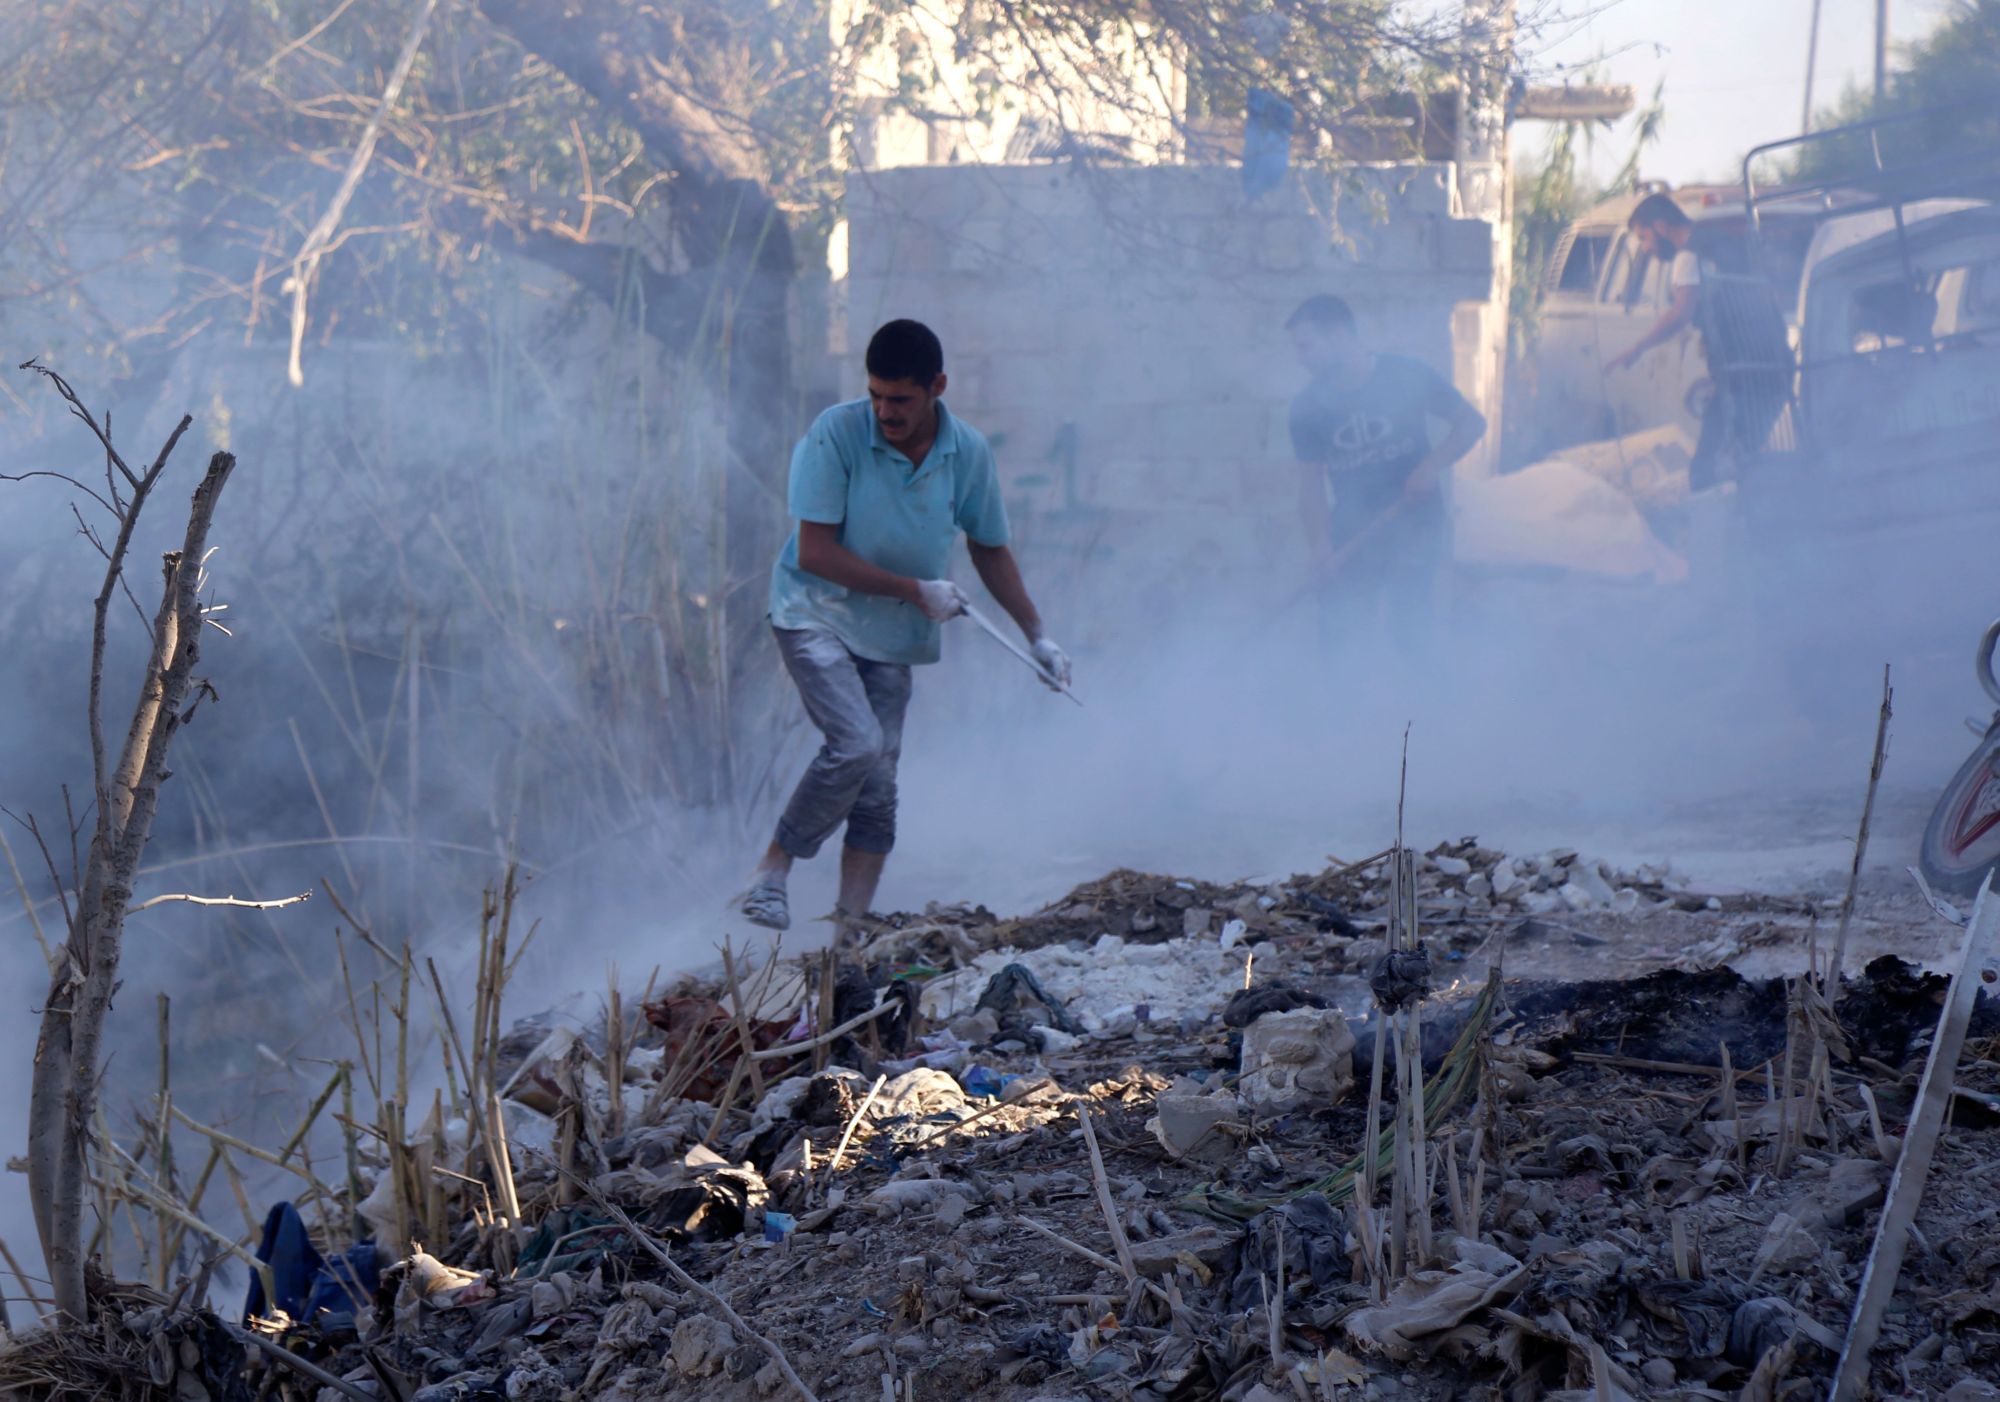 Syrians use dirt to put out a fire at the scene of a reported airstrike in the district of Jisr al-Shughur, in the Idlib province, on Tuesday. Russian warplanes battered Syria's rebel-controlled northwestern Idlib province on Tuesday for the first time in three weeks, the Syrian Observatory for Human Rights reported, as fears of a government offensive mount. | AFP-JIJI